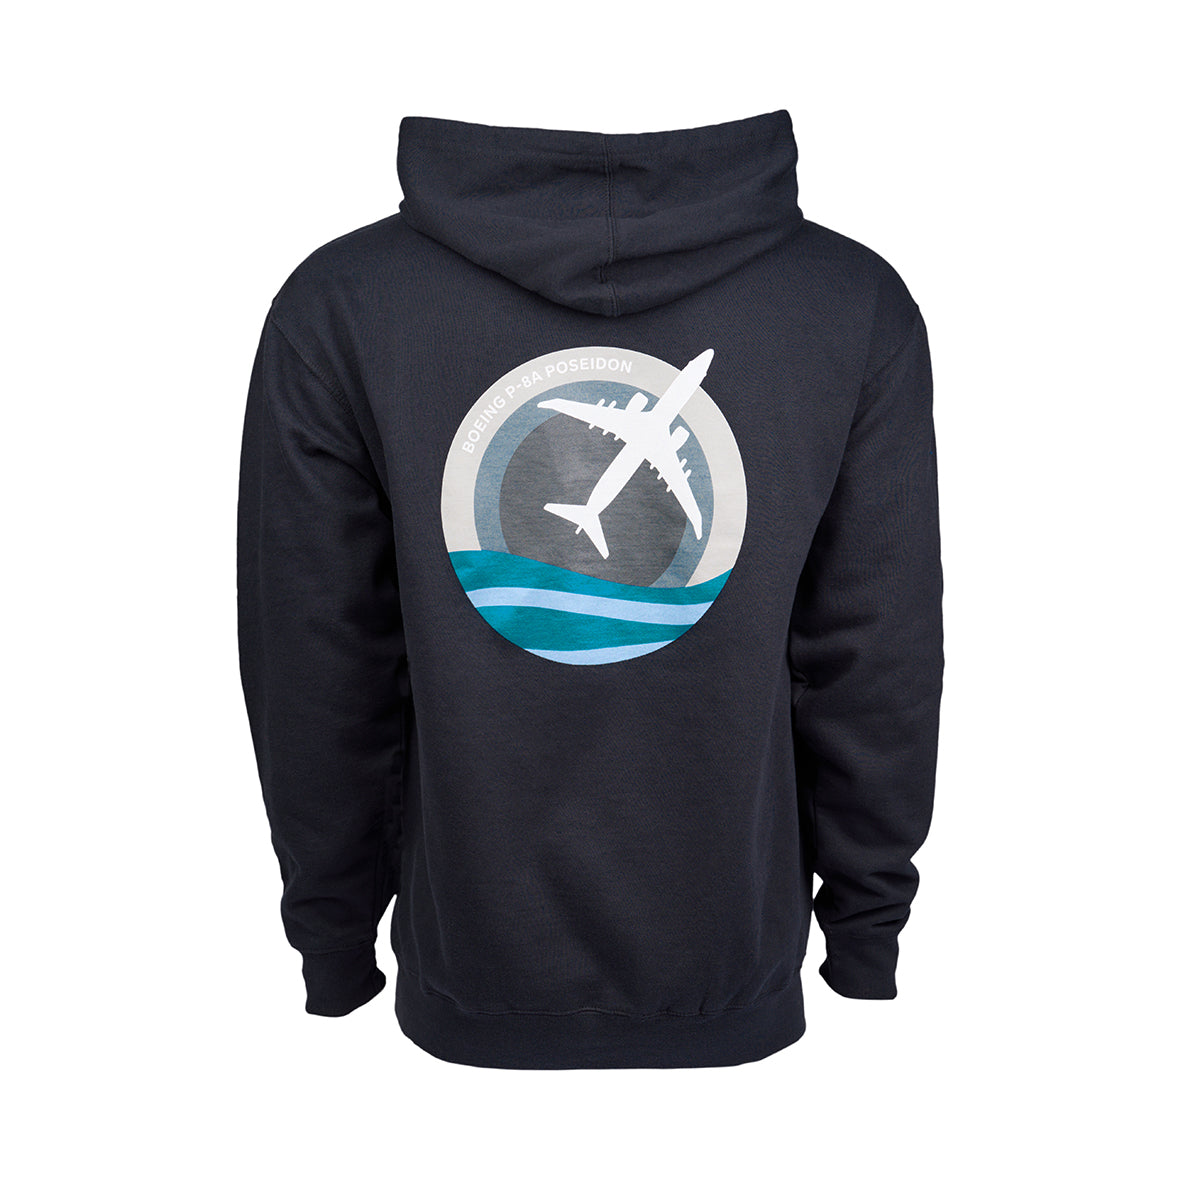 Full product image of the back side of the hooded sweatshirt in a navy blue color.  Showing the Skyward graphic of the Boeing P-8 Poseidon